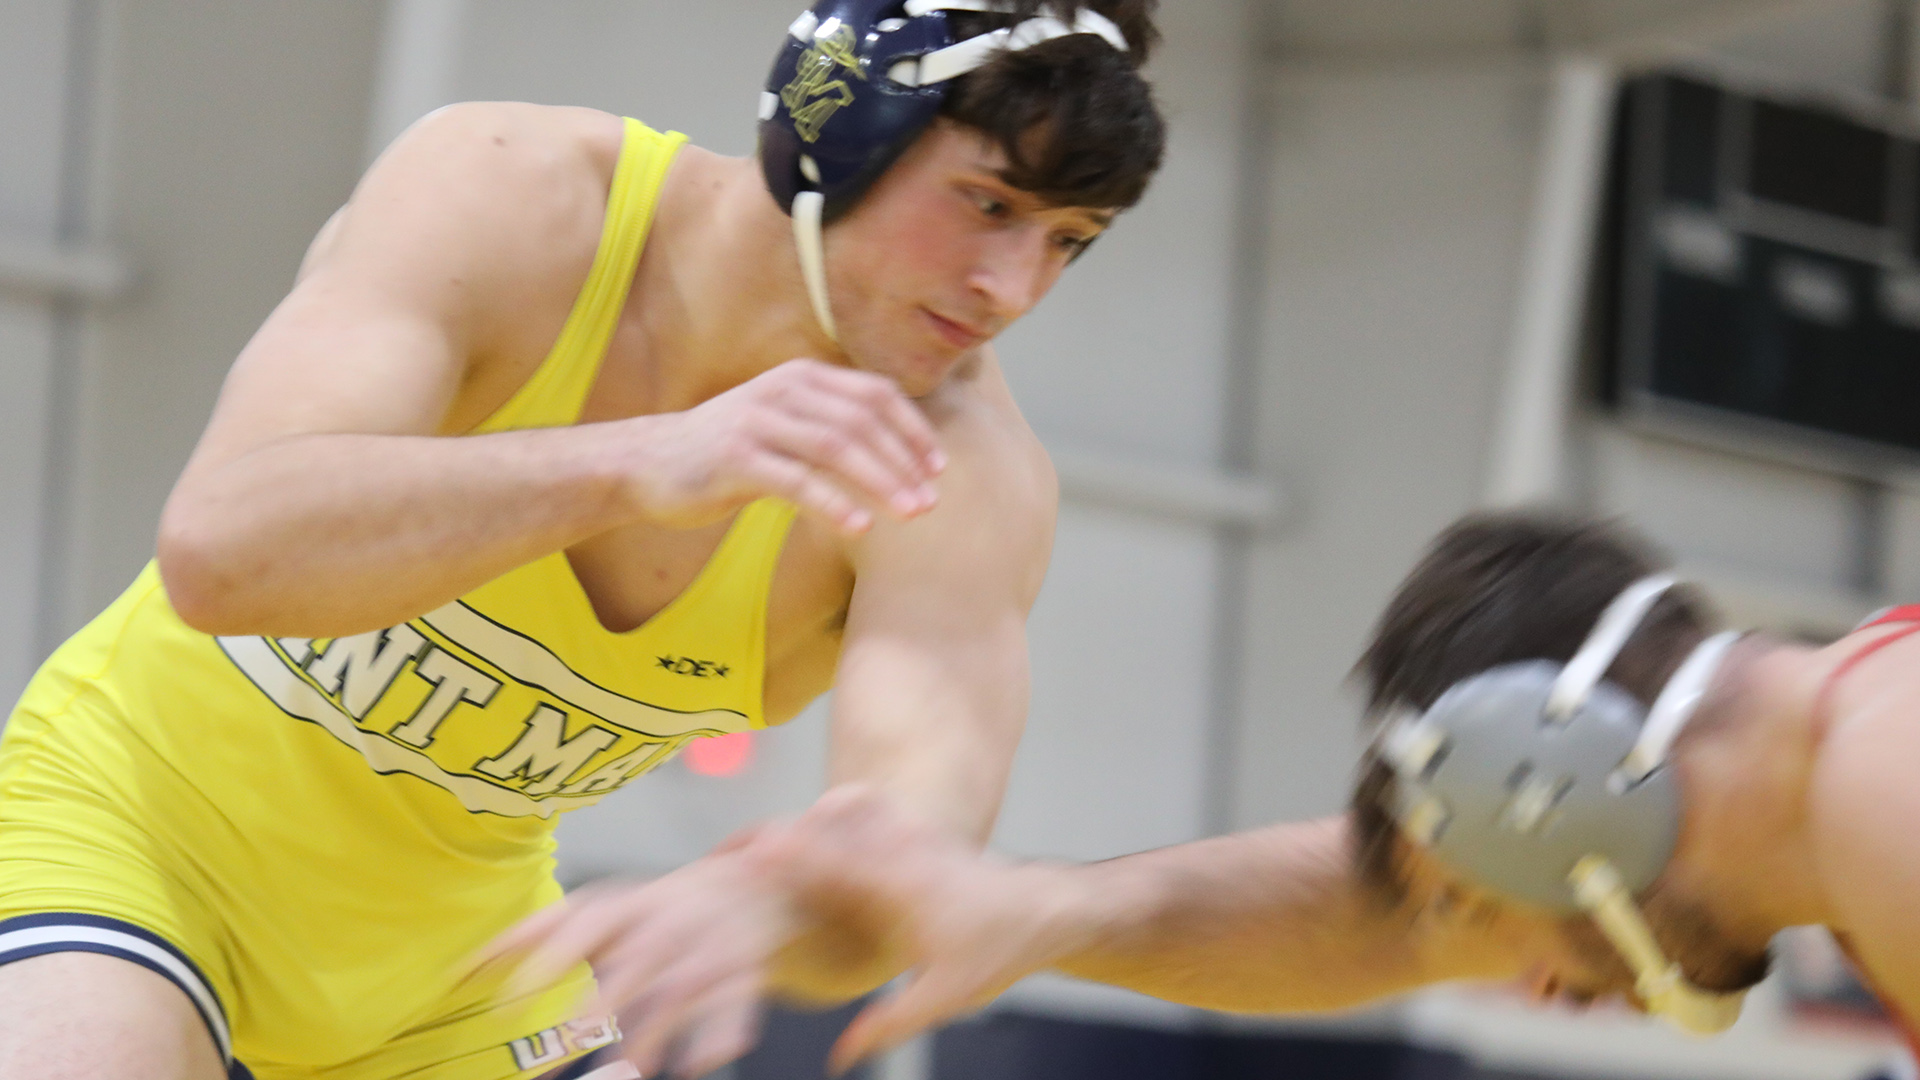 Three Spires Make it to Championship Rounds at Doane Open